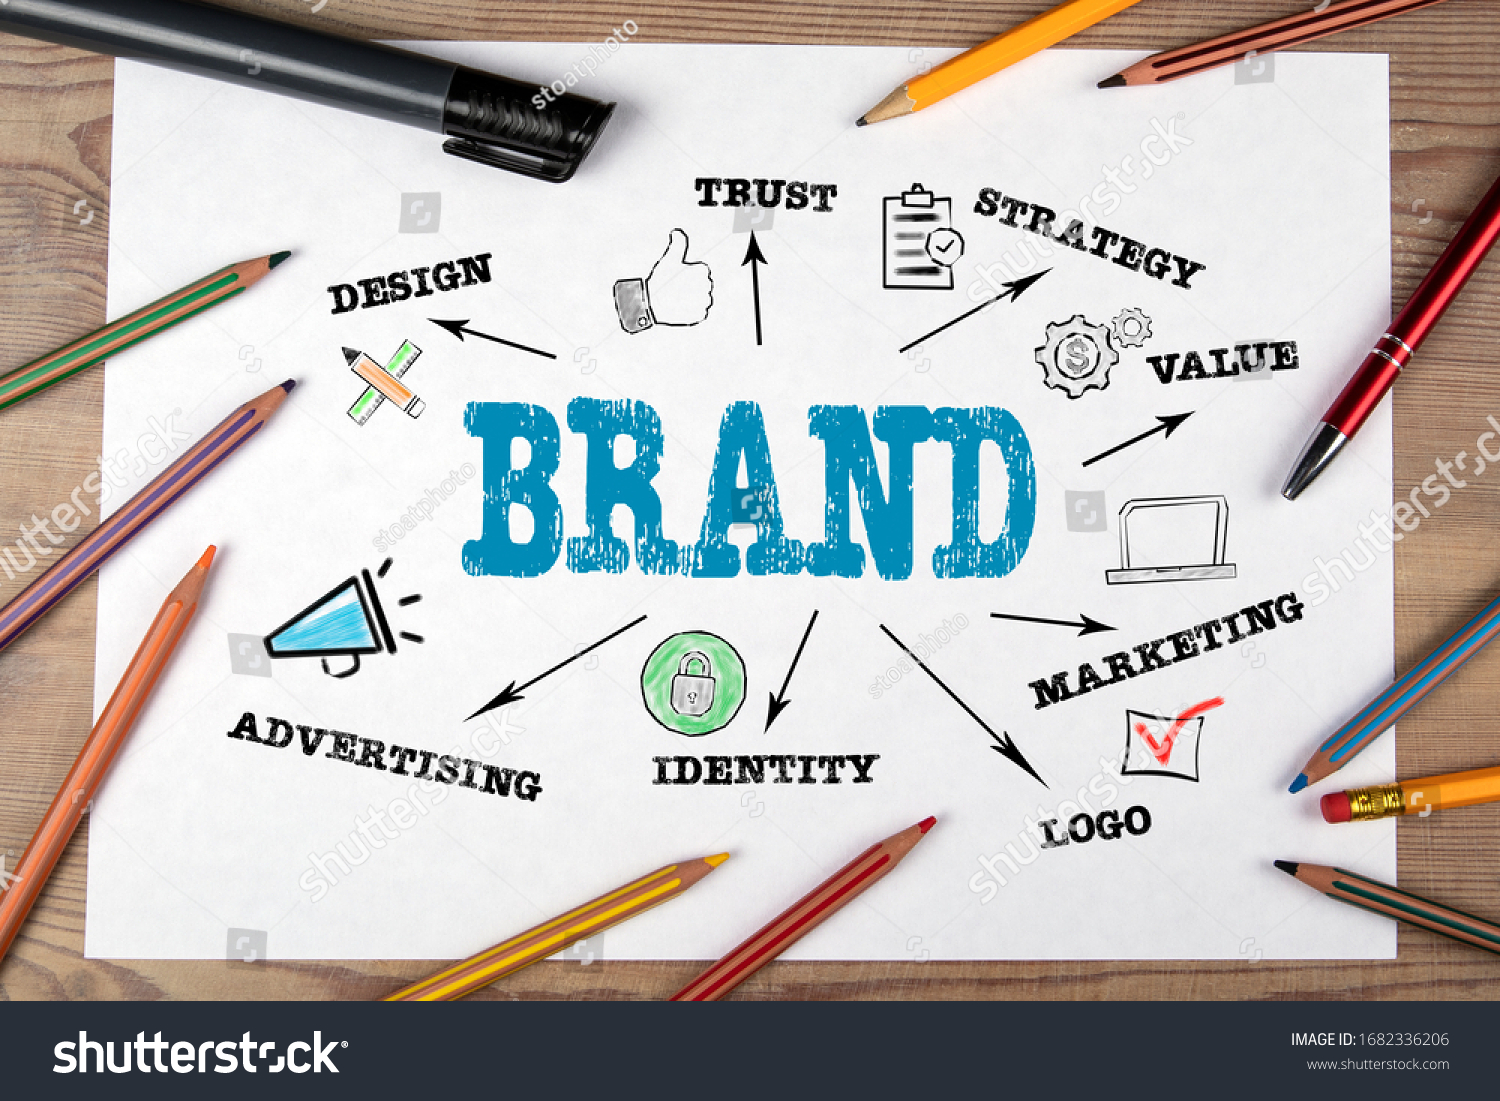 BRAND. Design, Value, Marketing and Identity concept. Chart with keywords and icons. White sheet of paper and colored pencils on a wooden table #1682336206